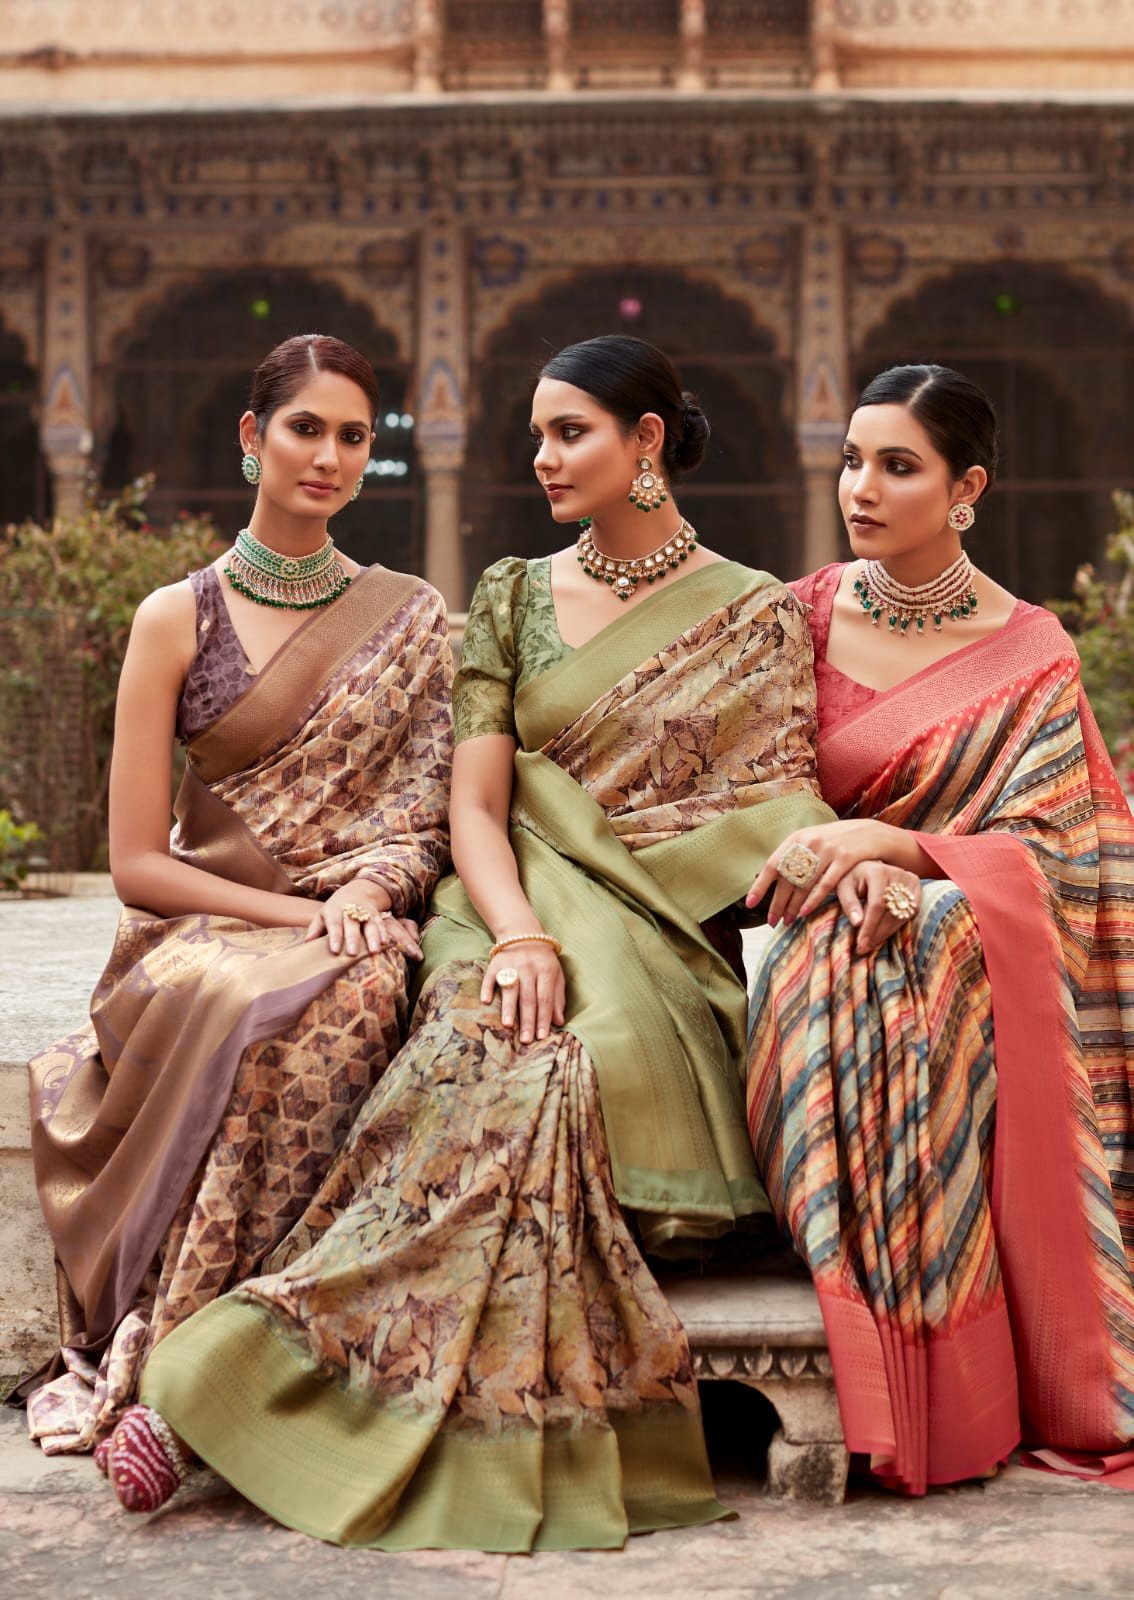 New) Direct manufacturer of sarees for Dealers, Wholesaler & Retailers